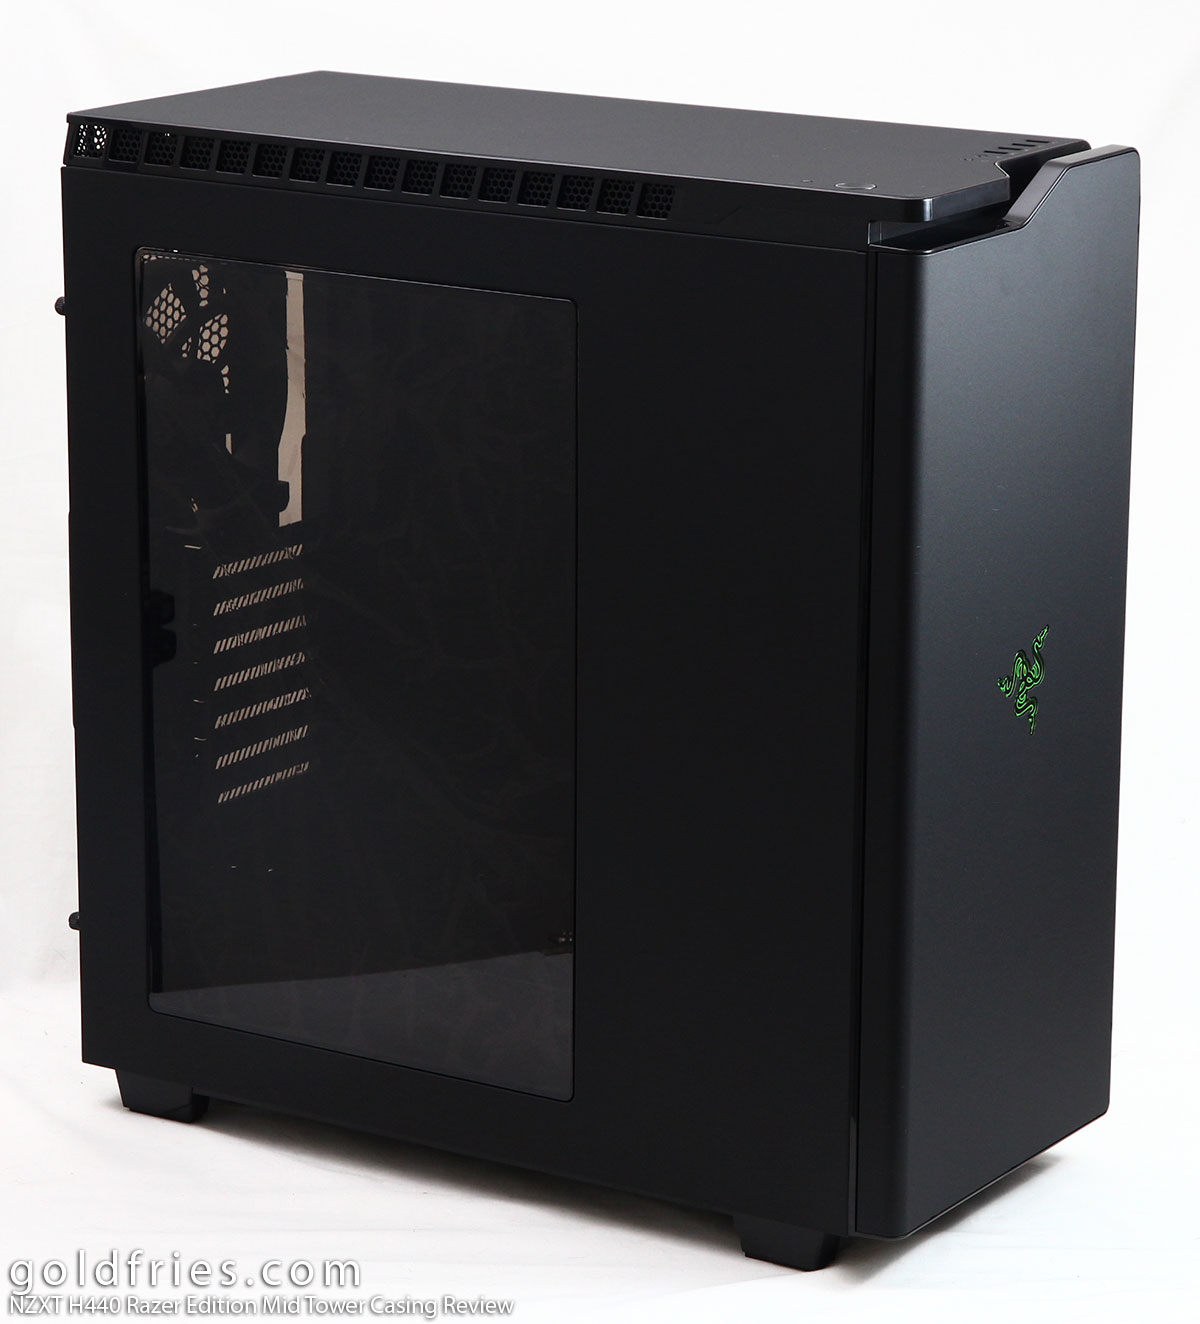 NZXT H440 Razer Edition Mid Tower Casing Review